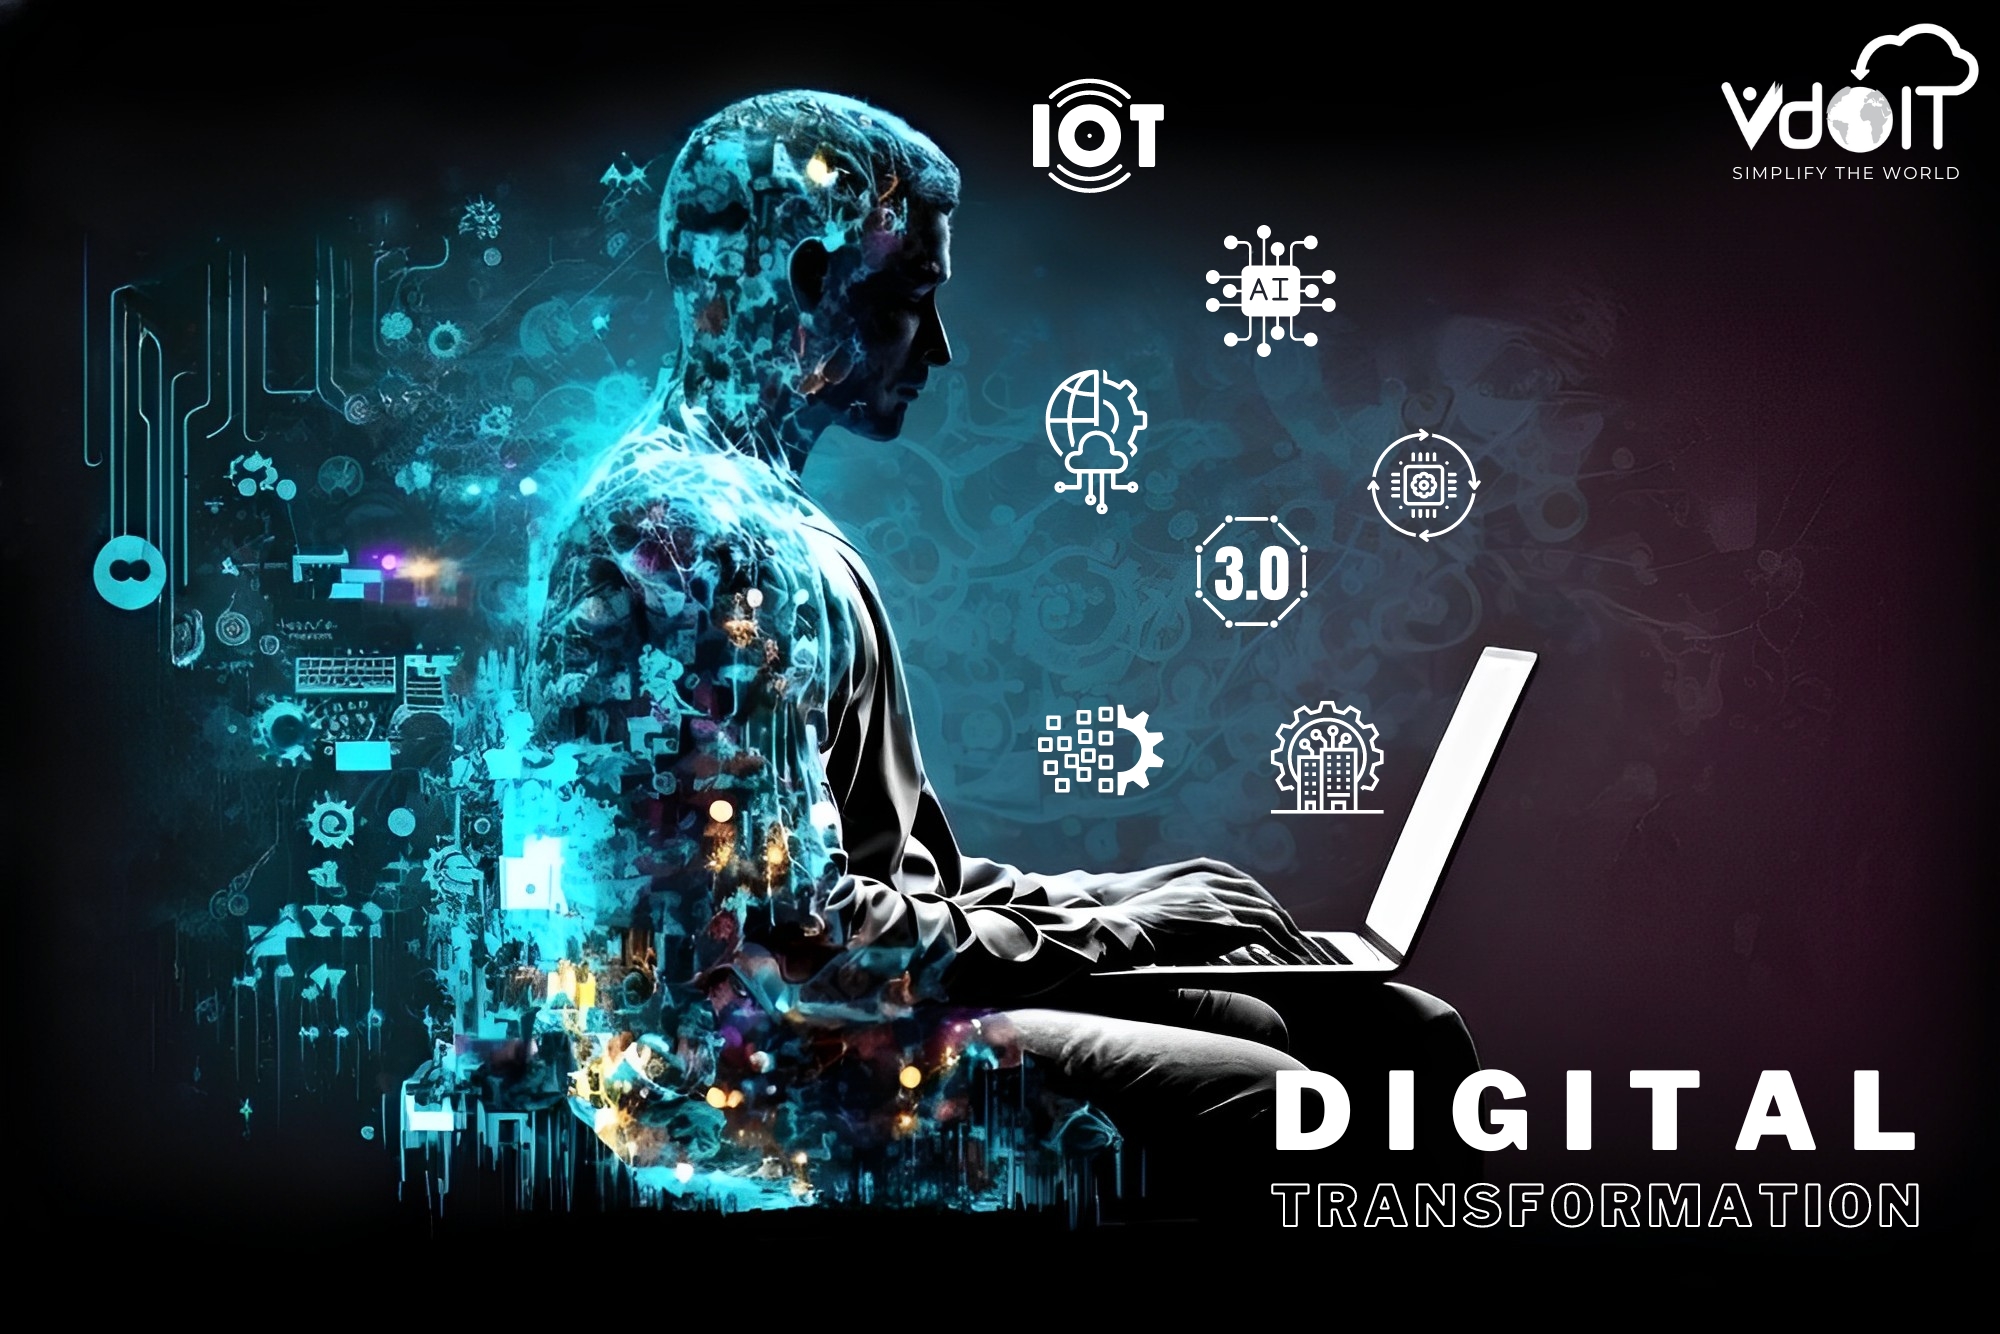 Digital Transformation Company For Your Business Needs